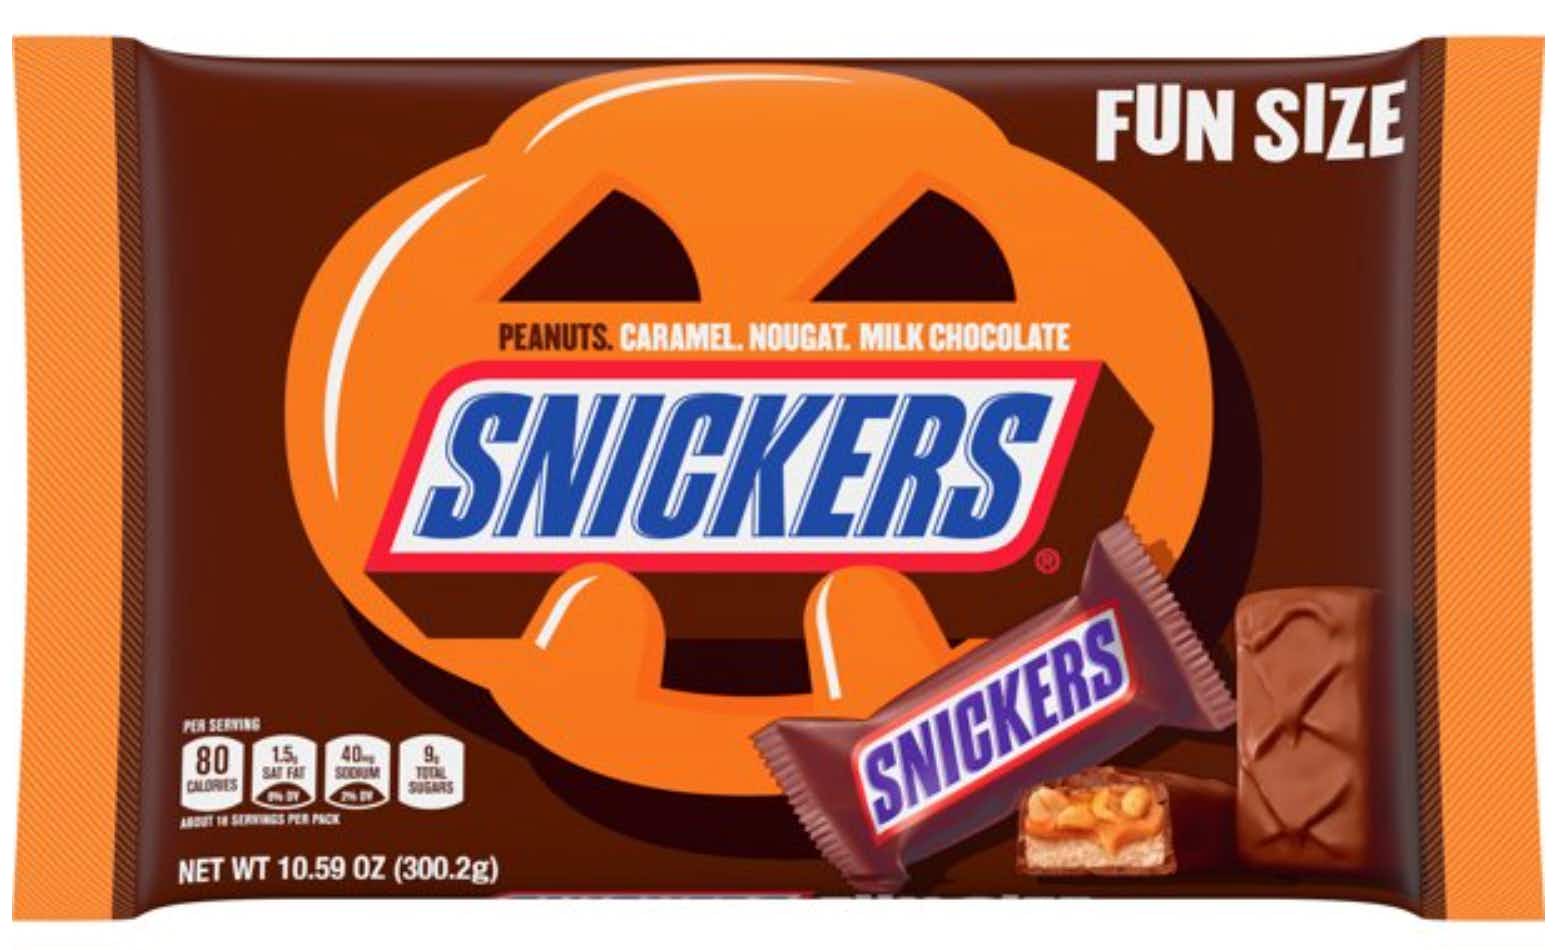 Snickers candy bar bag